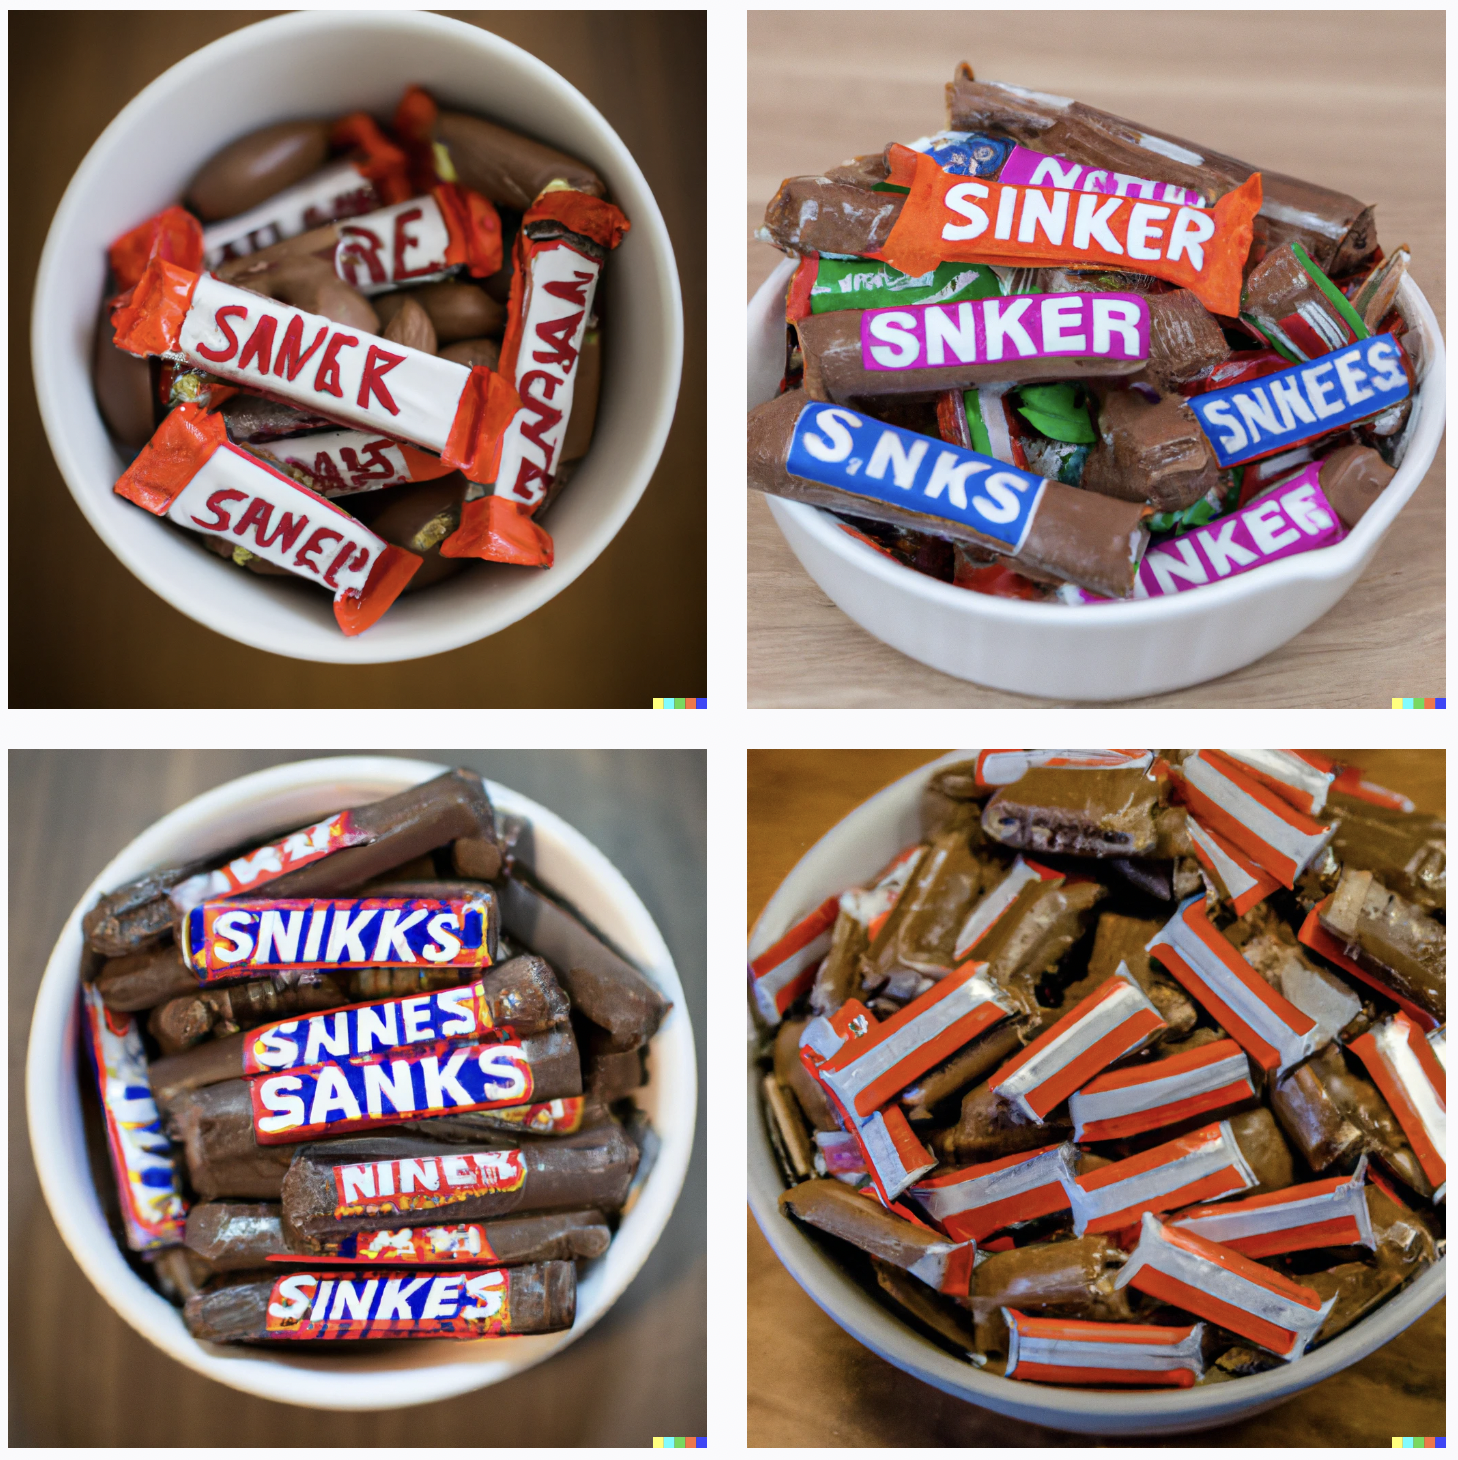 Bowls of candies, most of which are only partially wrapped. Some have labels, but they don't match the snickers color scheme, and say things like "Sinker", "Saner", "Snikks", and "Sanks".